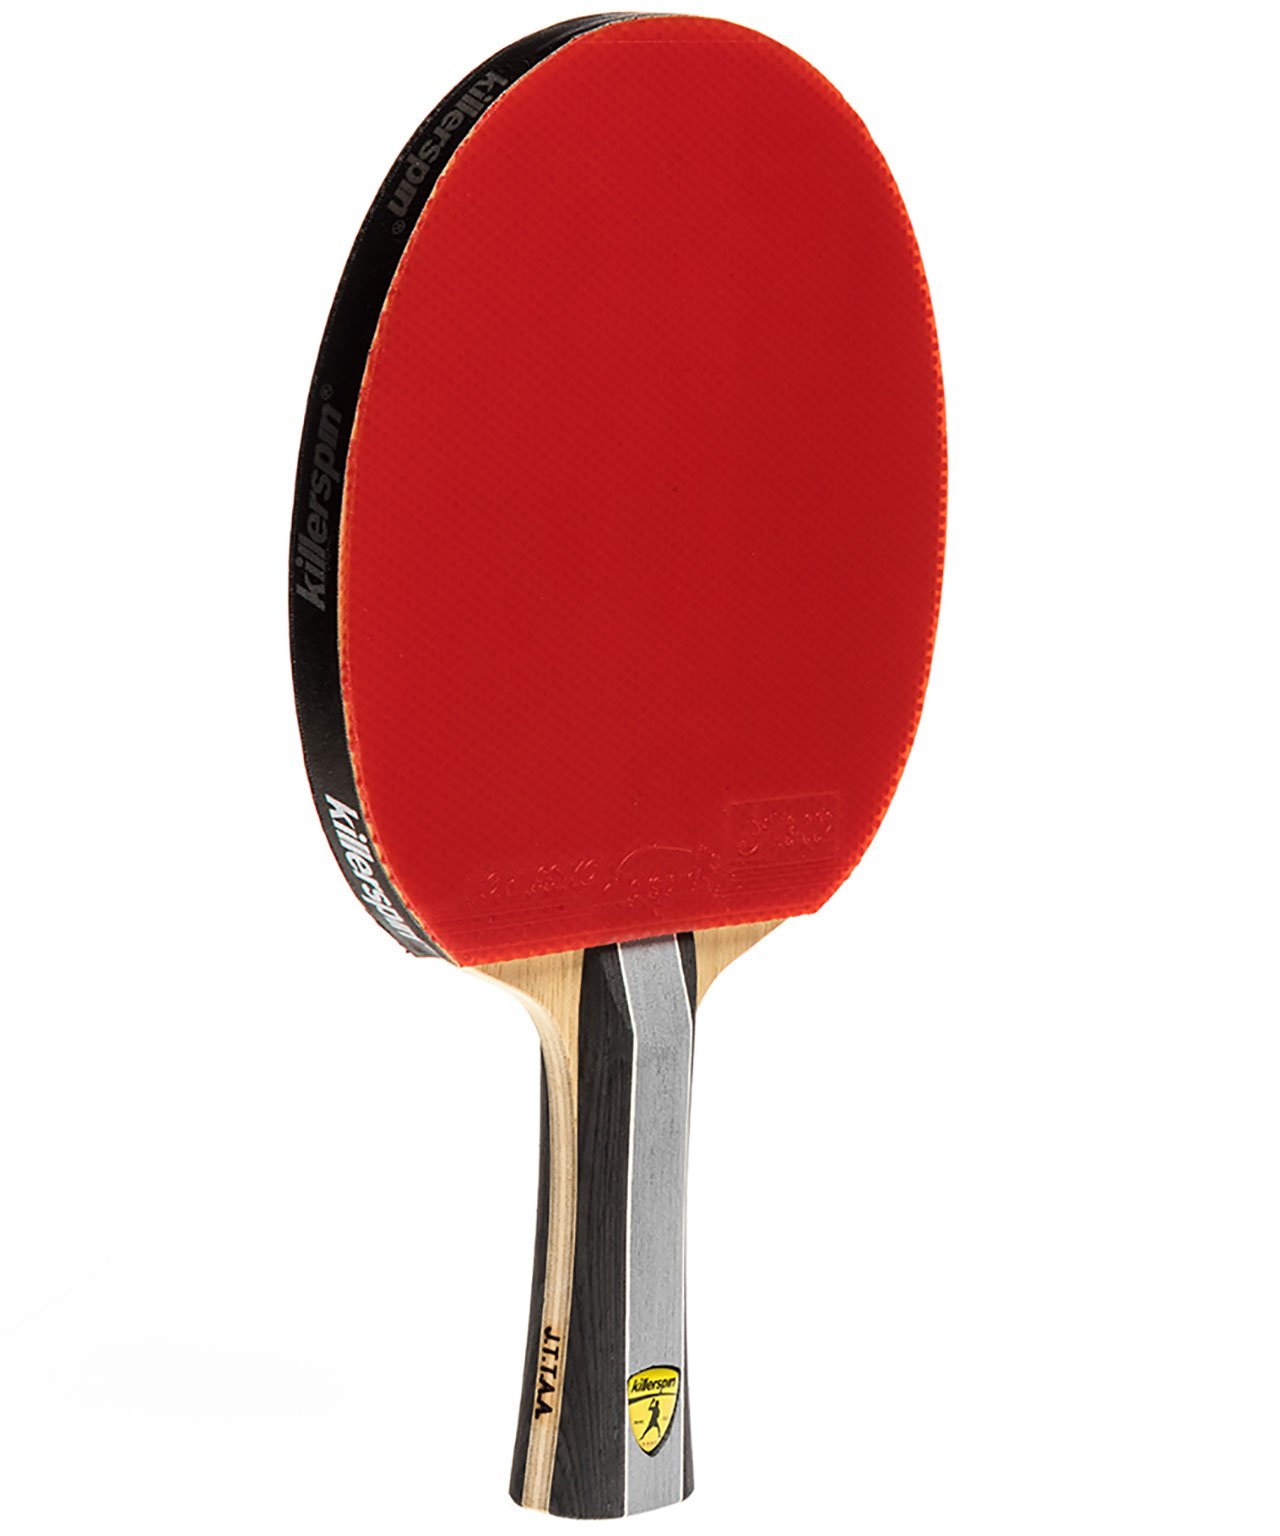 Killerspin Ping Pong Paddle Kido 7P RTG Premium - Flared Red Fortissimo Rubber